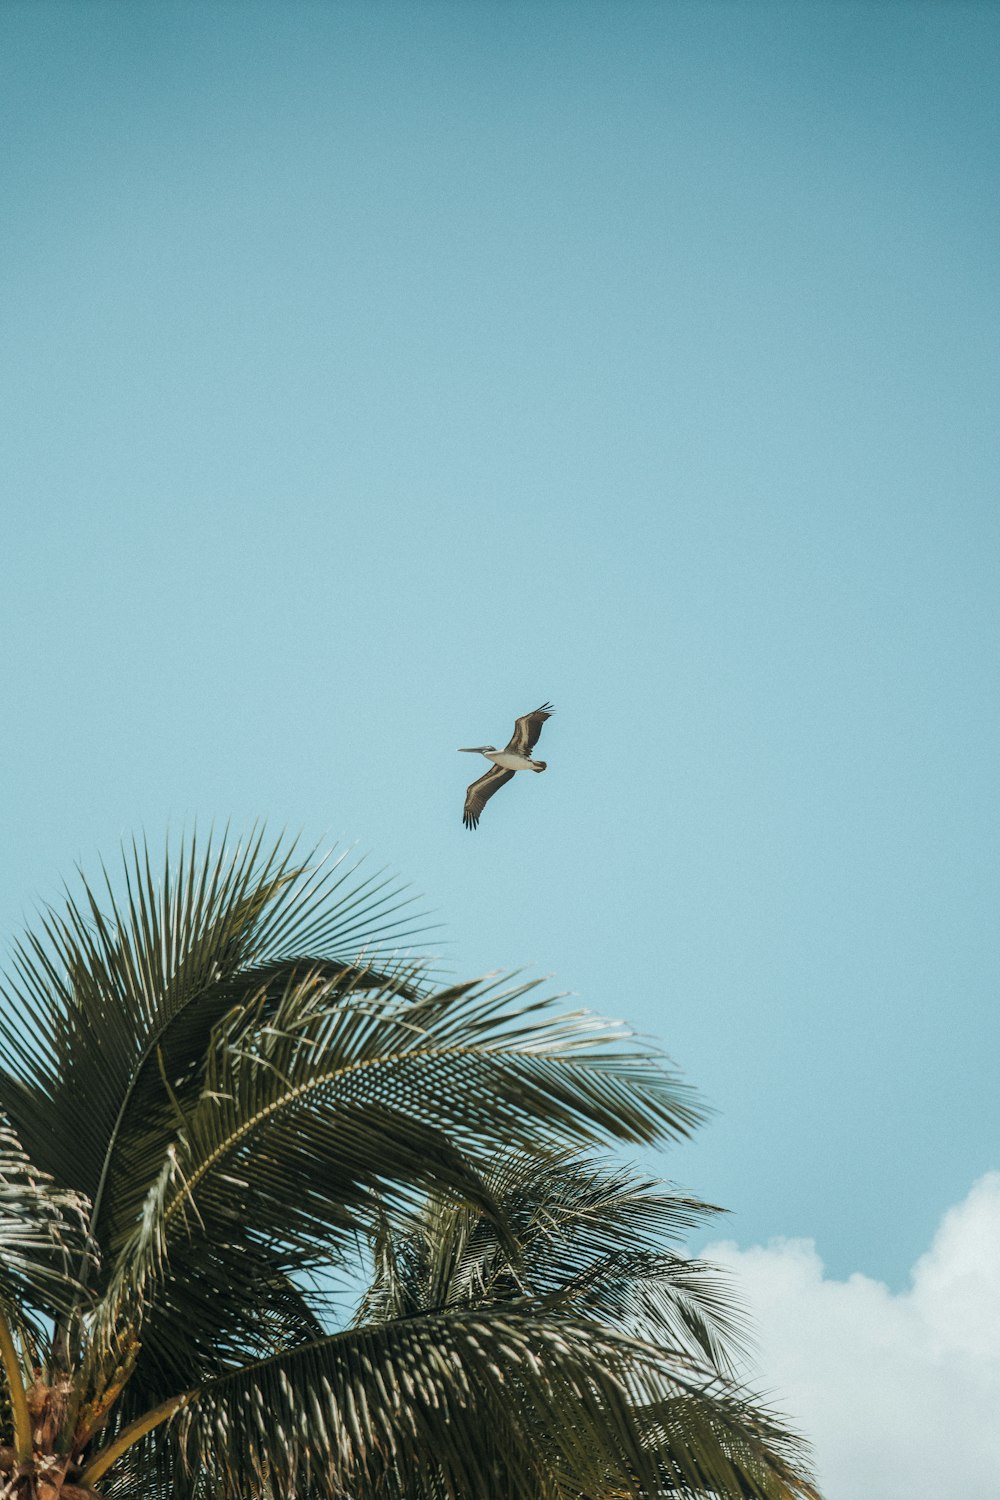 a bird flying over a palm tree on a sunny day